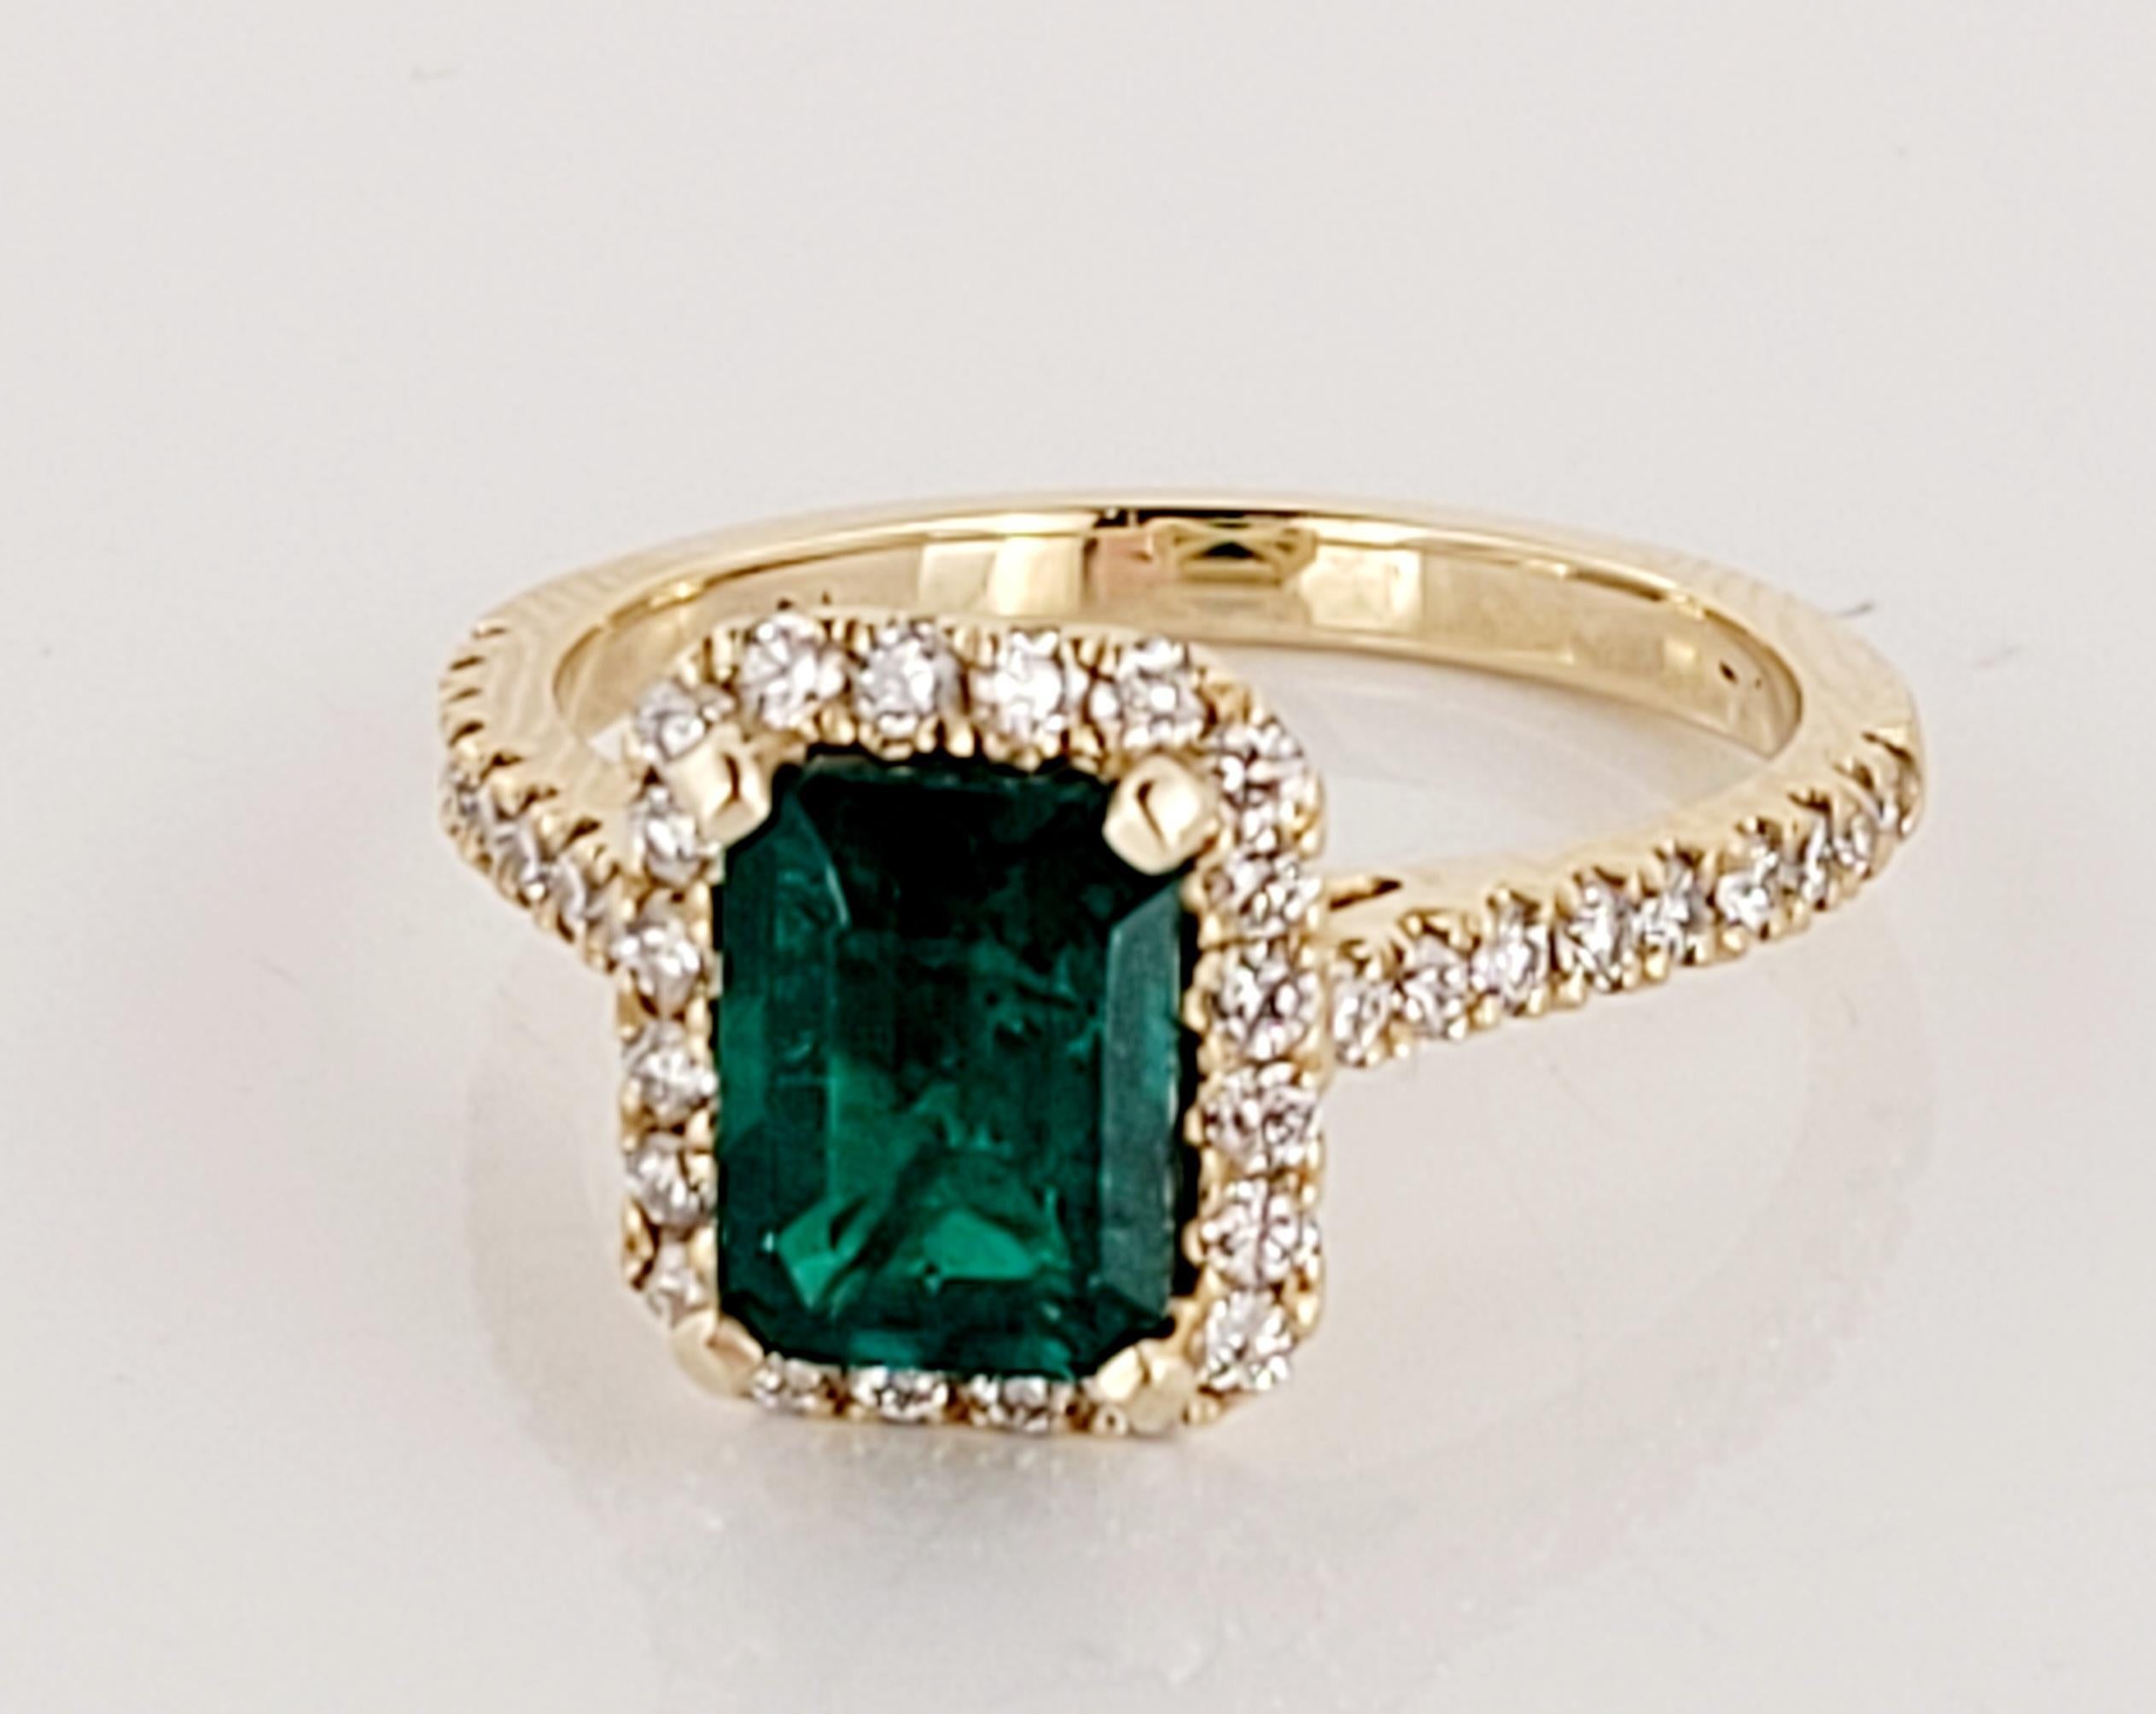 Emerald Cut Emerald Ring with White Diamond and 14K Yellow Gold Pour femmes en vente